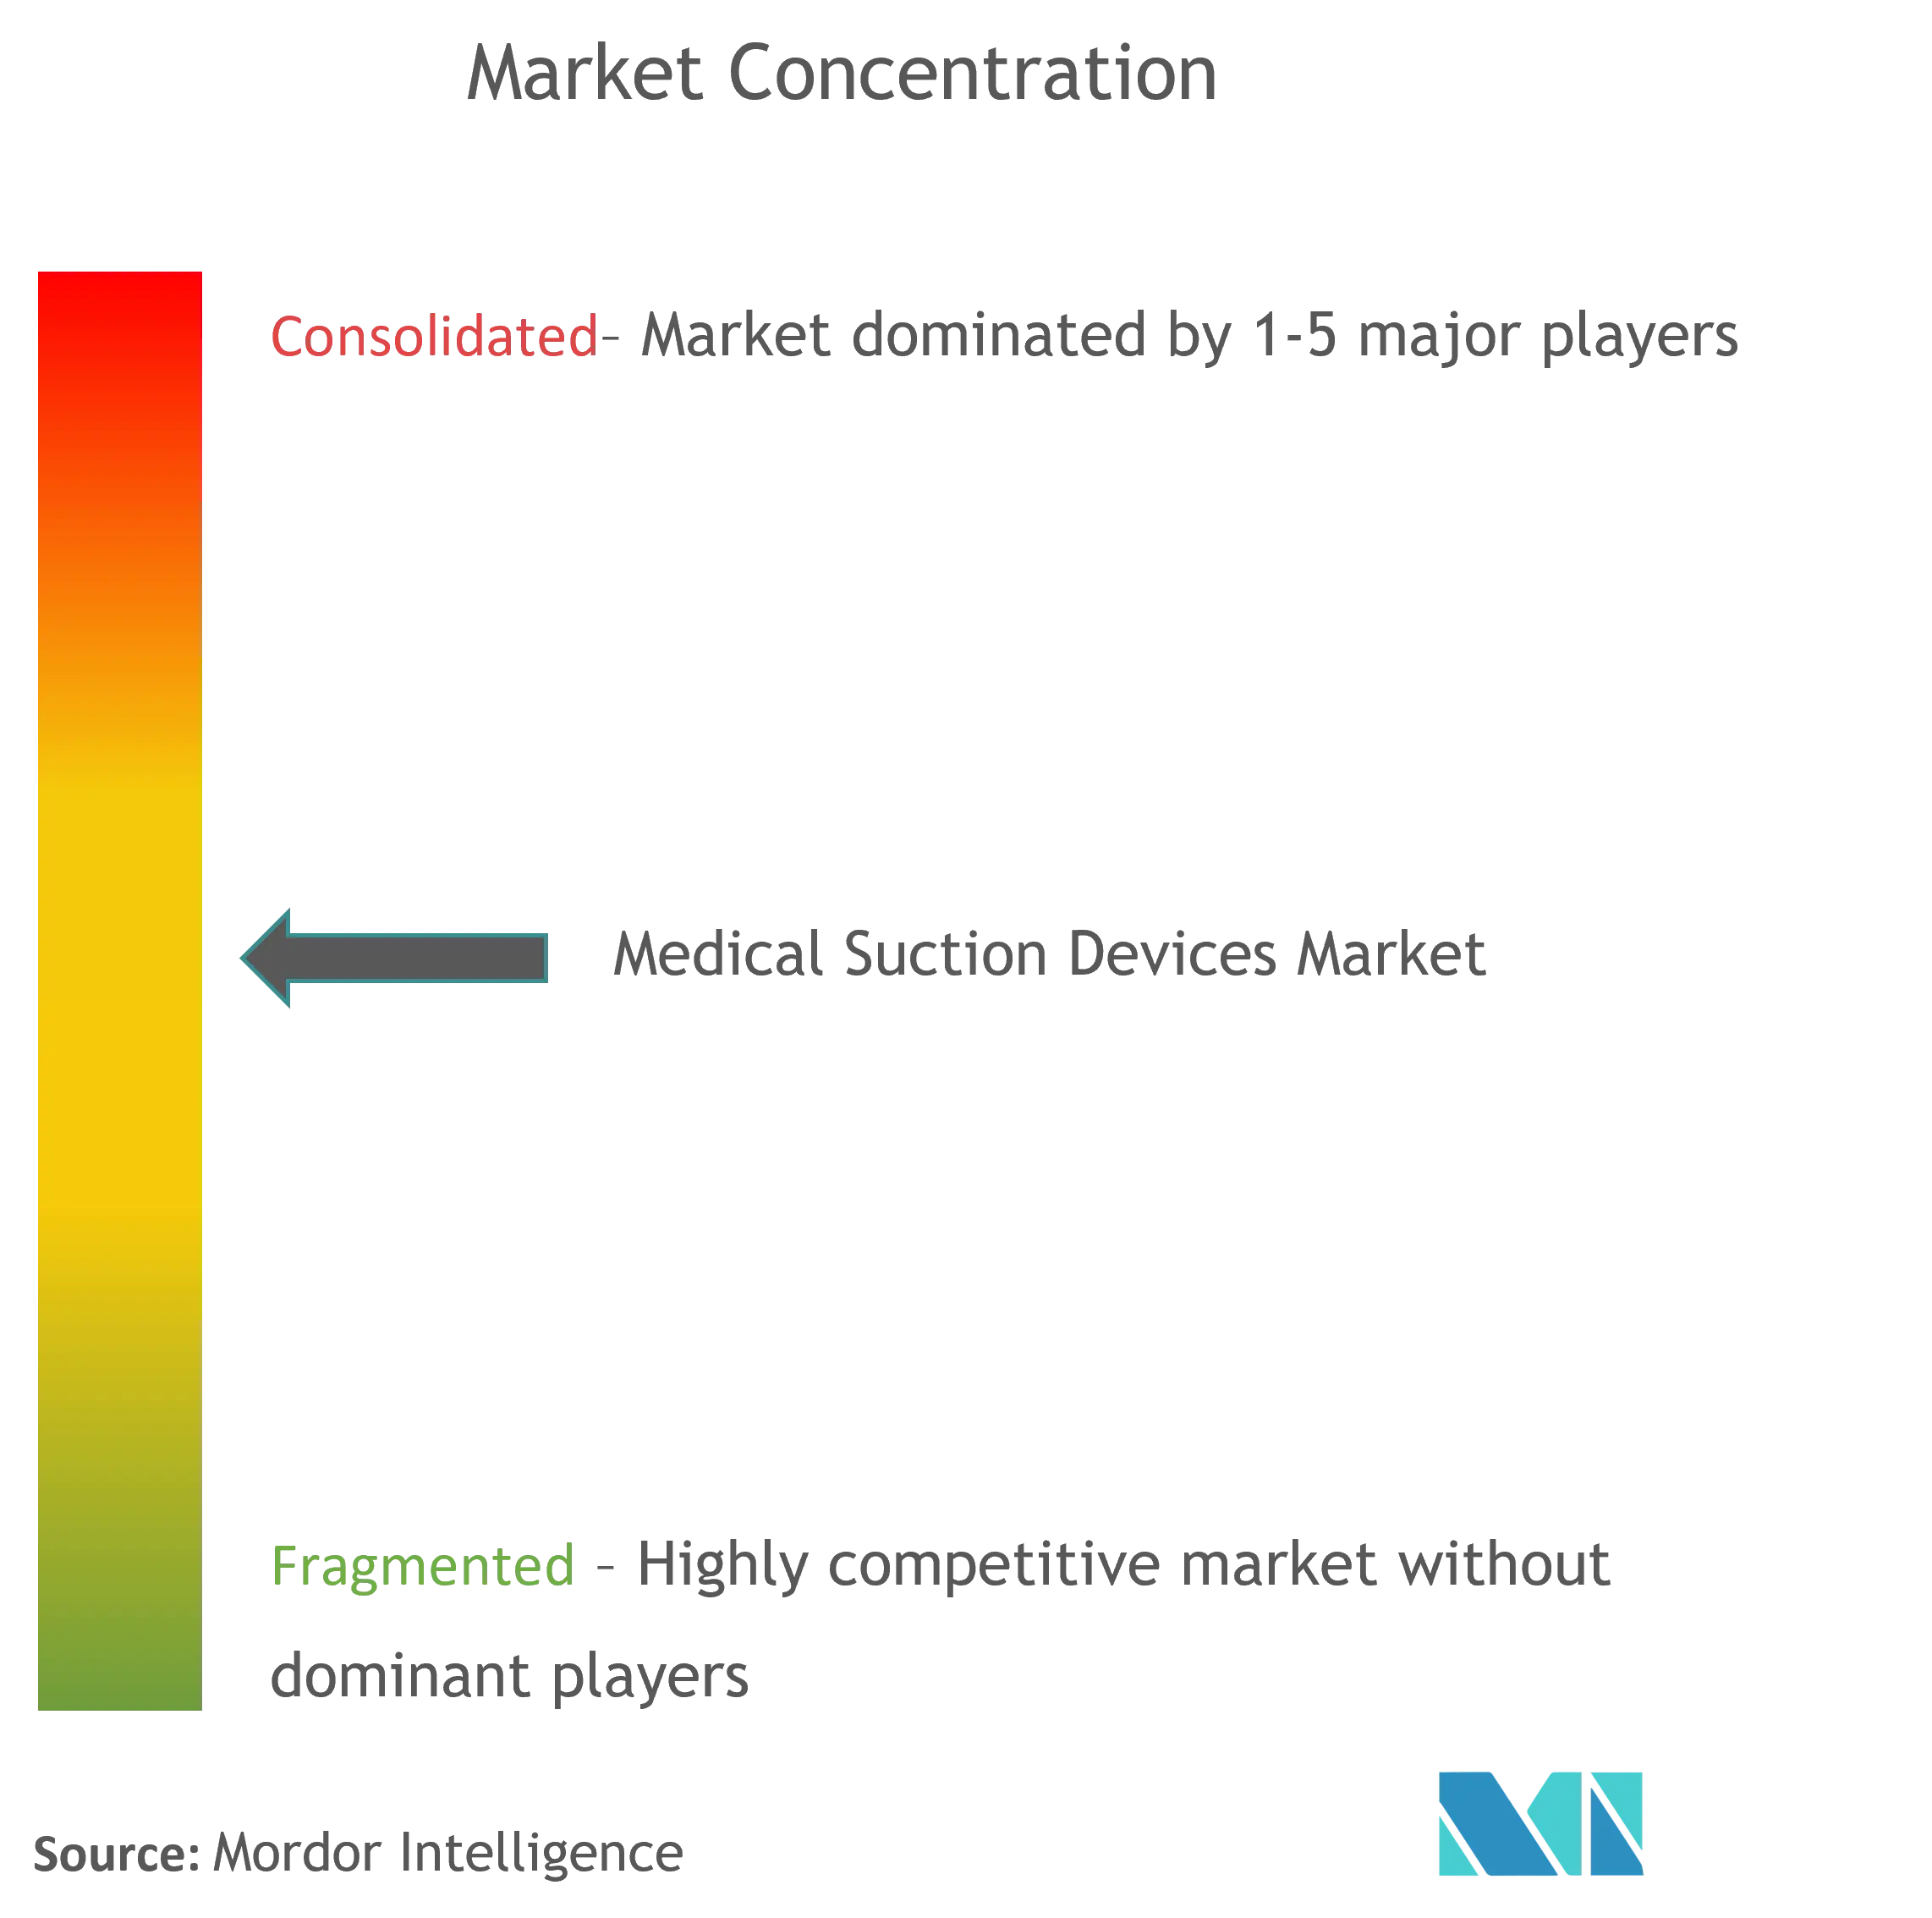 Medical Suction Devices Market Concentration